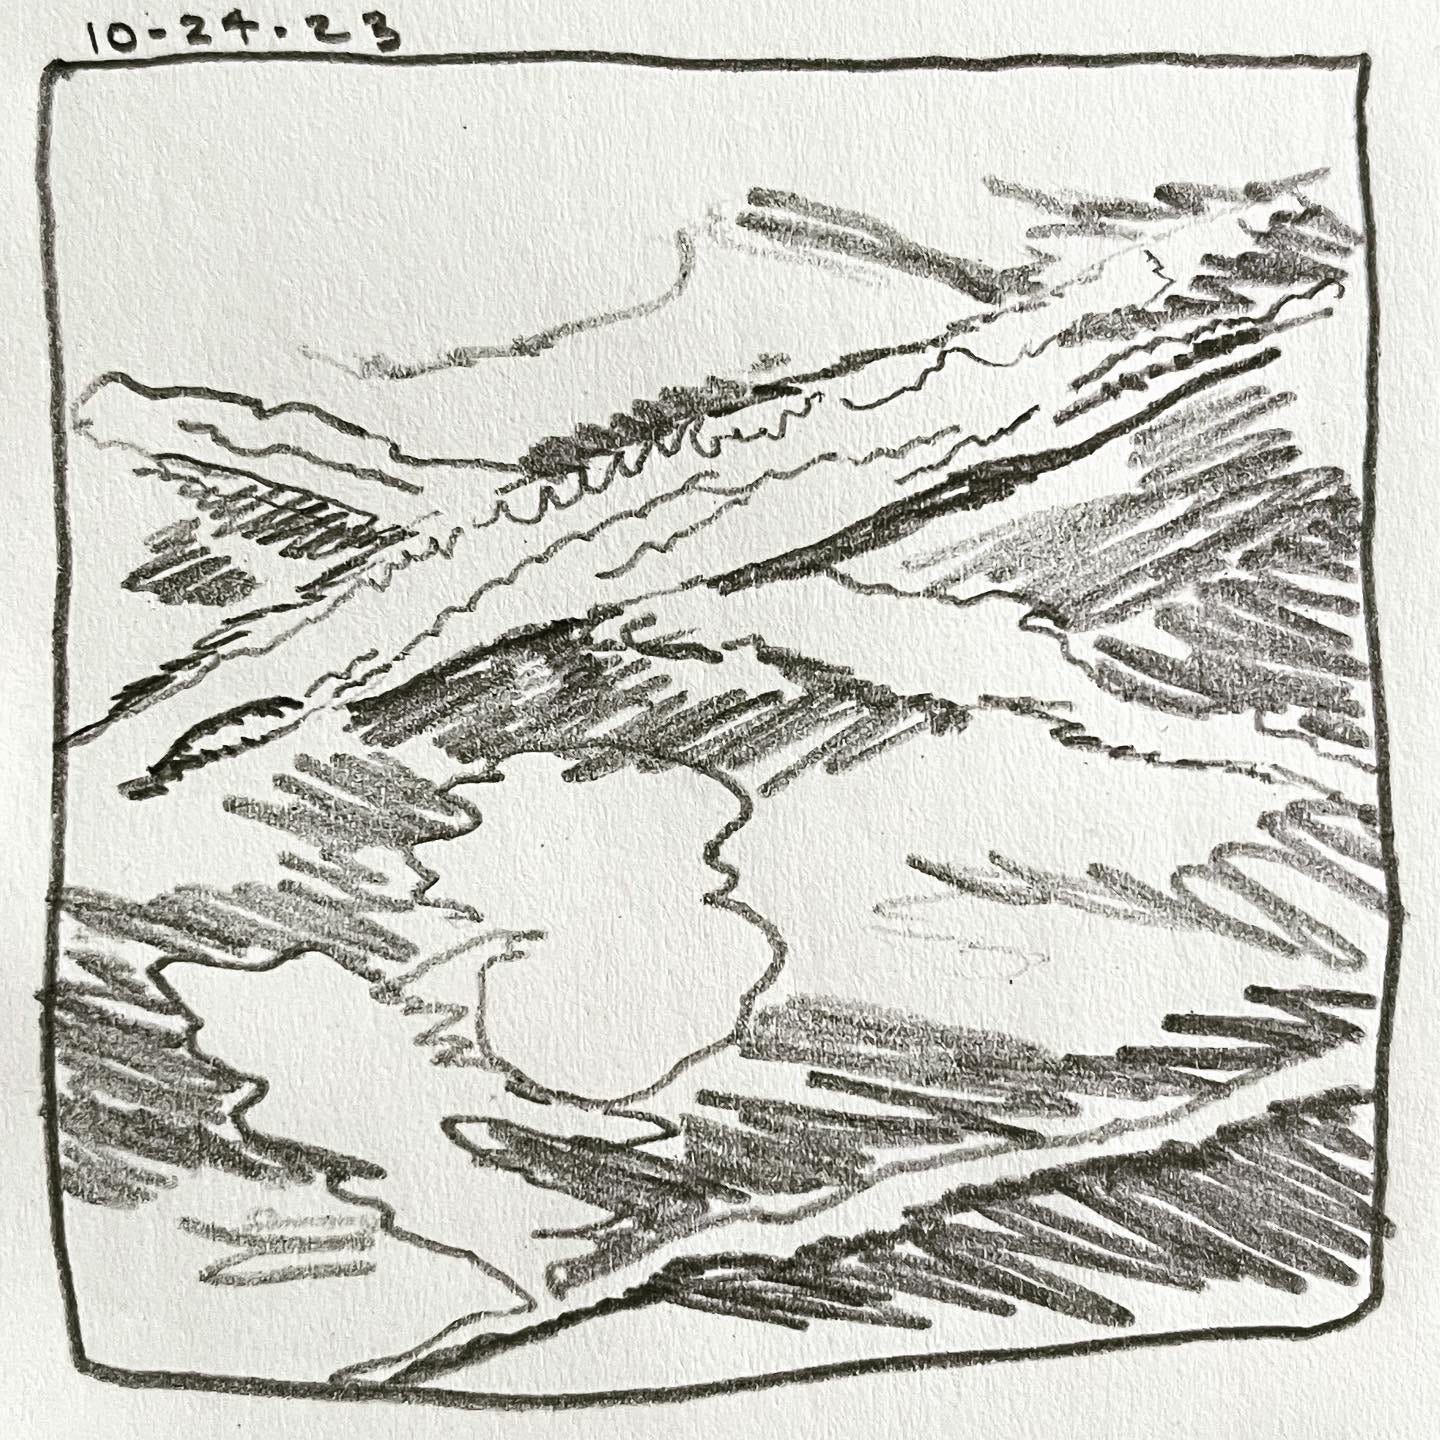 Panel 1: no text Image: fluffy and angular clouds and chemtrails in the sky. Rough pencil lines make crisscrossing patterns. A sense of floating.